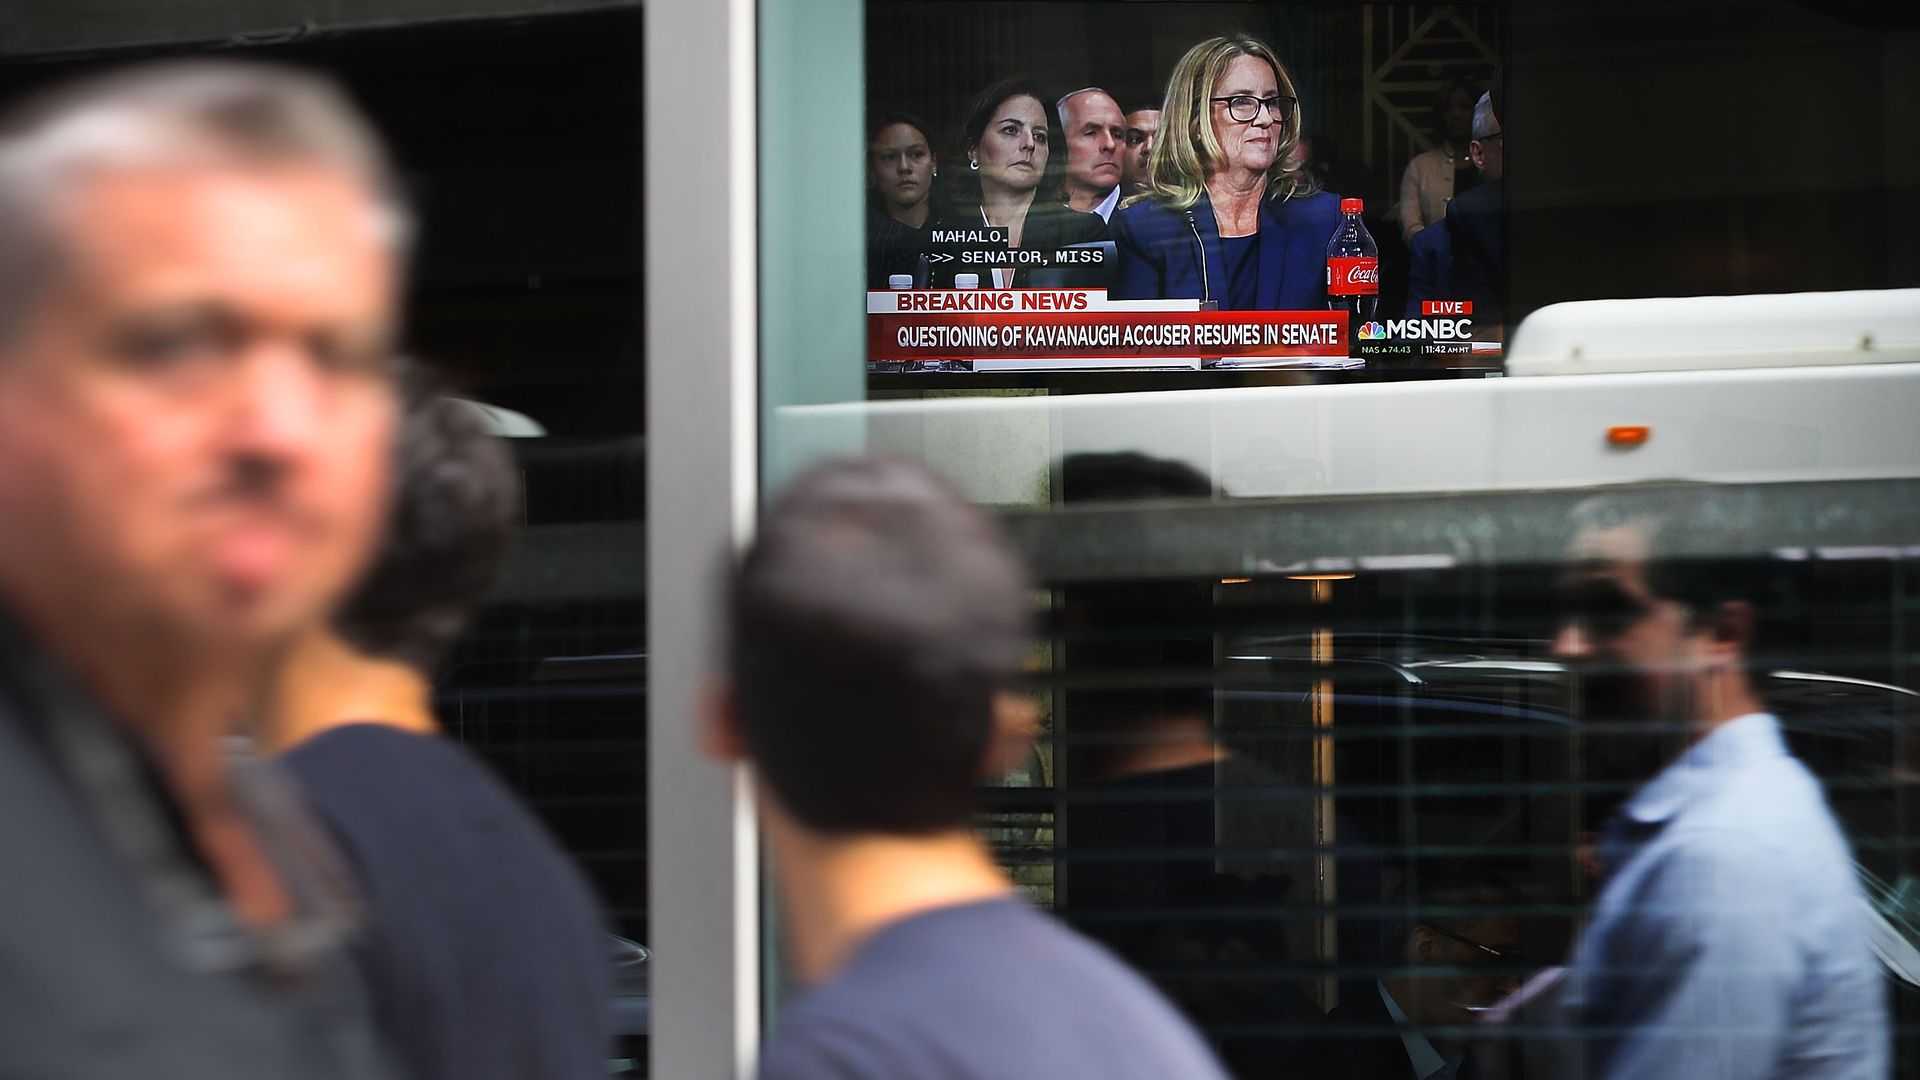 People walk by as the Ford hearing plays on a TV inside a window.